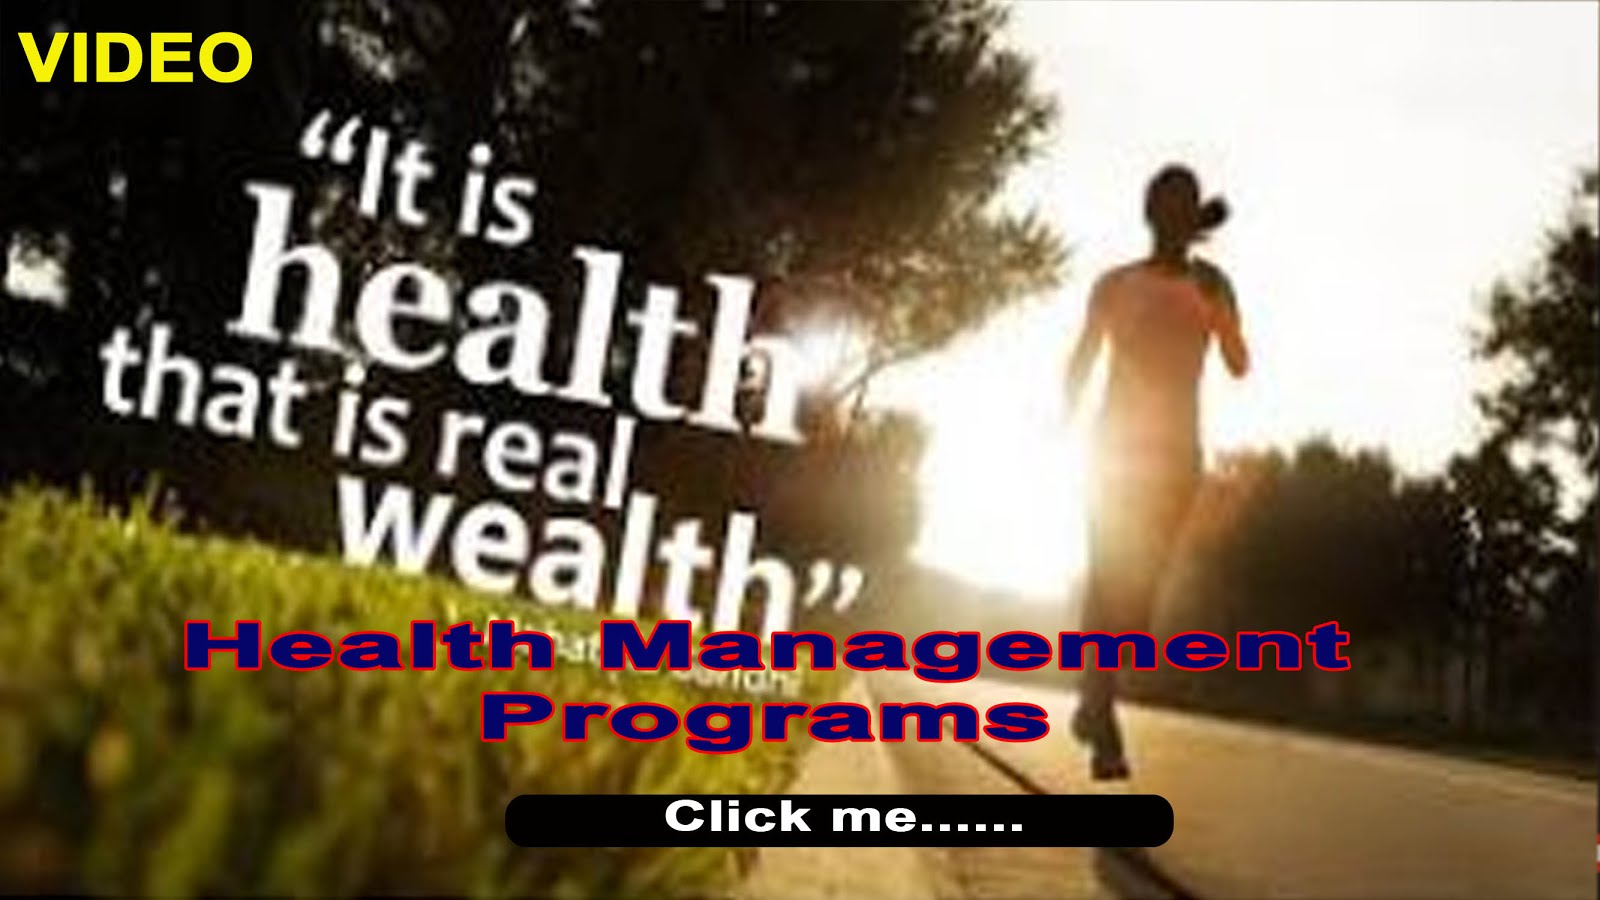 Health is Beautiful - Watch the Video